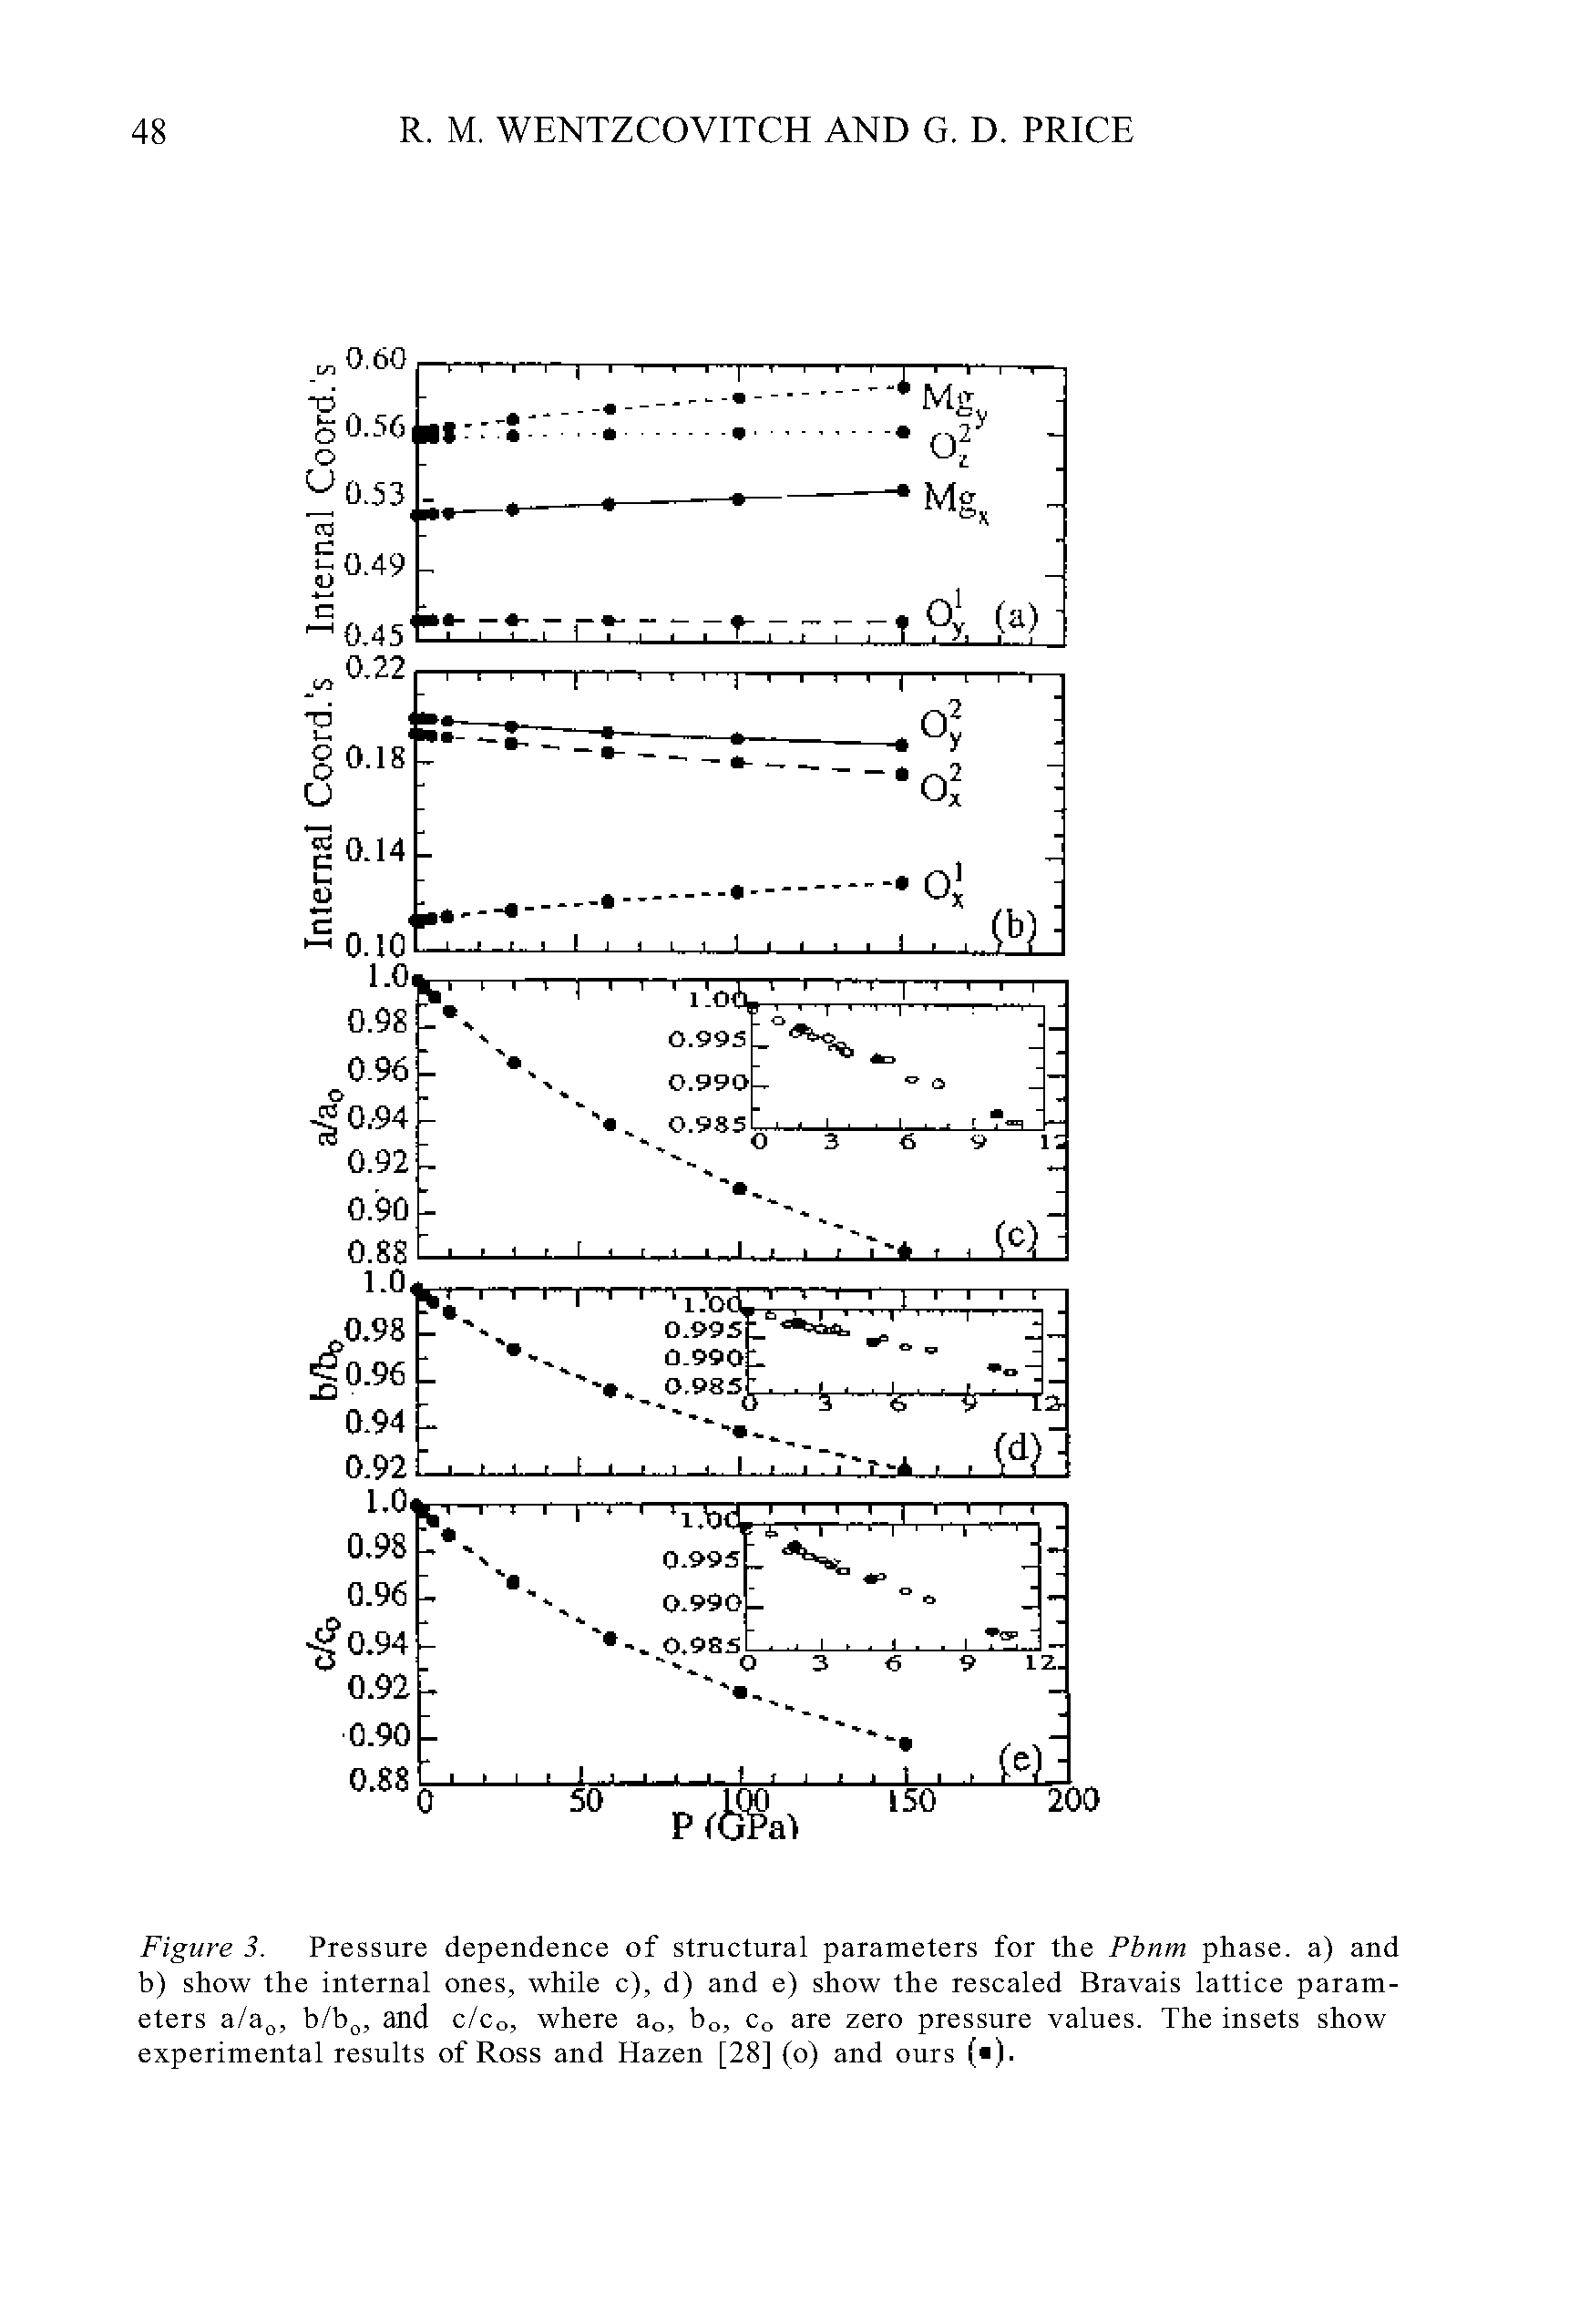 Figure 3. Pressure dependence of structural parameters for the Pbnm phase, a) and b) show the internal ones, while c), d) and e) show the rescaled Bravais lattice parameters a/a , b/b , and c/co, where ao, bo, Co are zero pressure values. The insets show experimental results of Ross and Hazen [28] (o) and ours ( ).